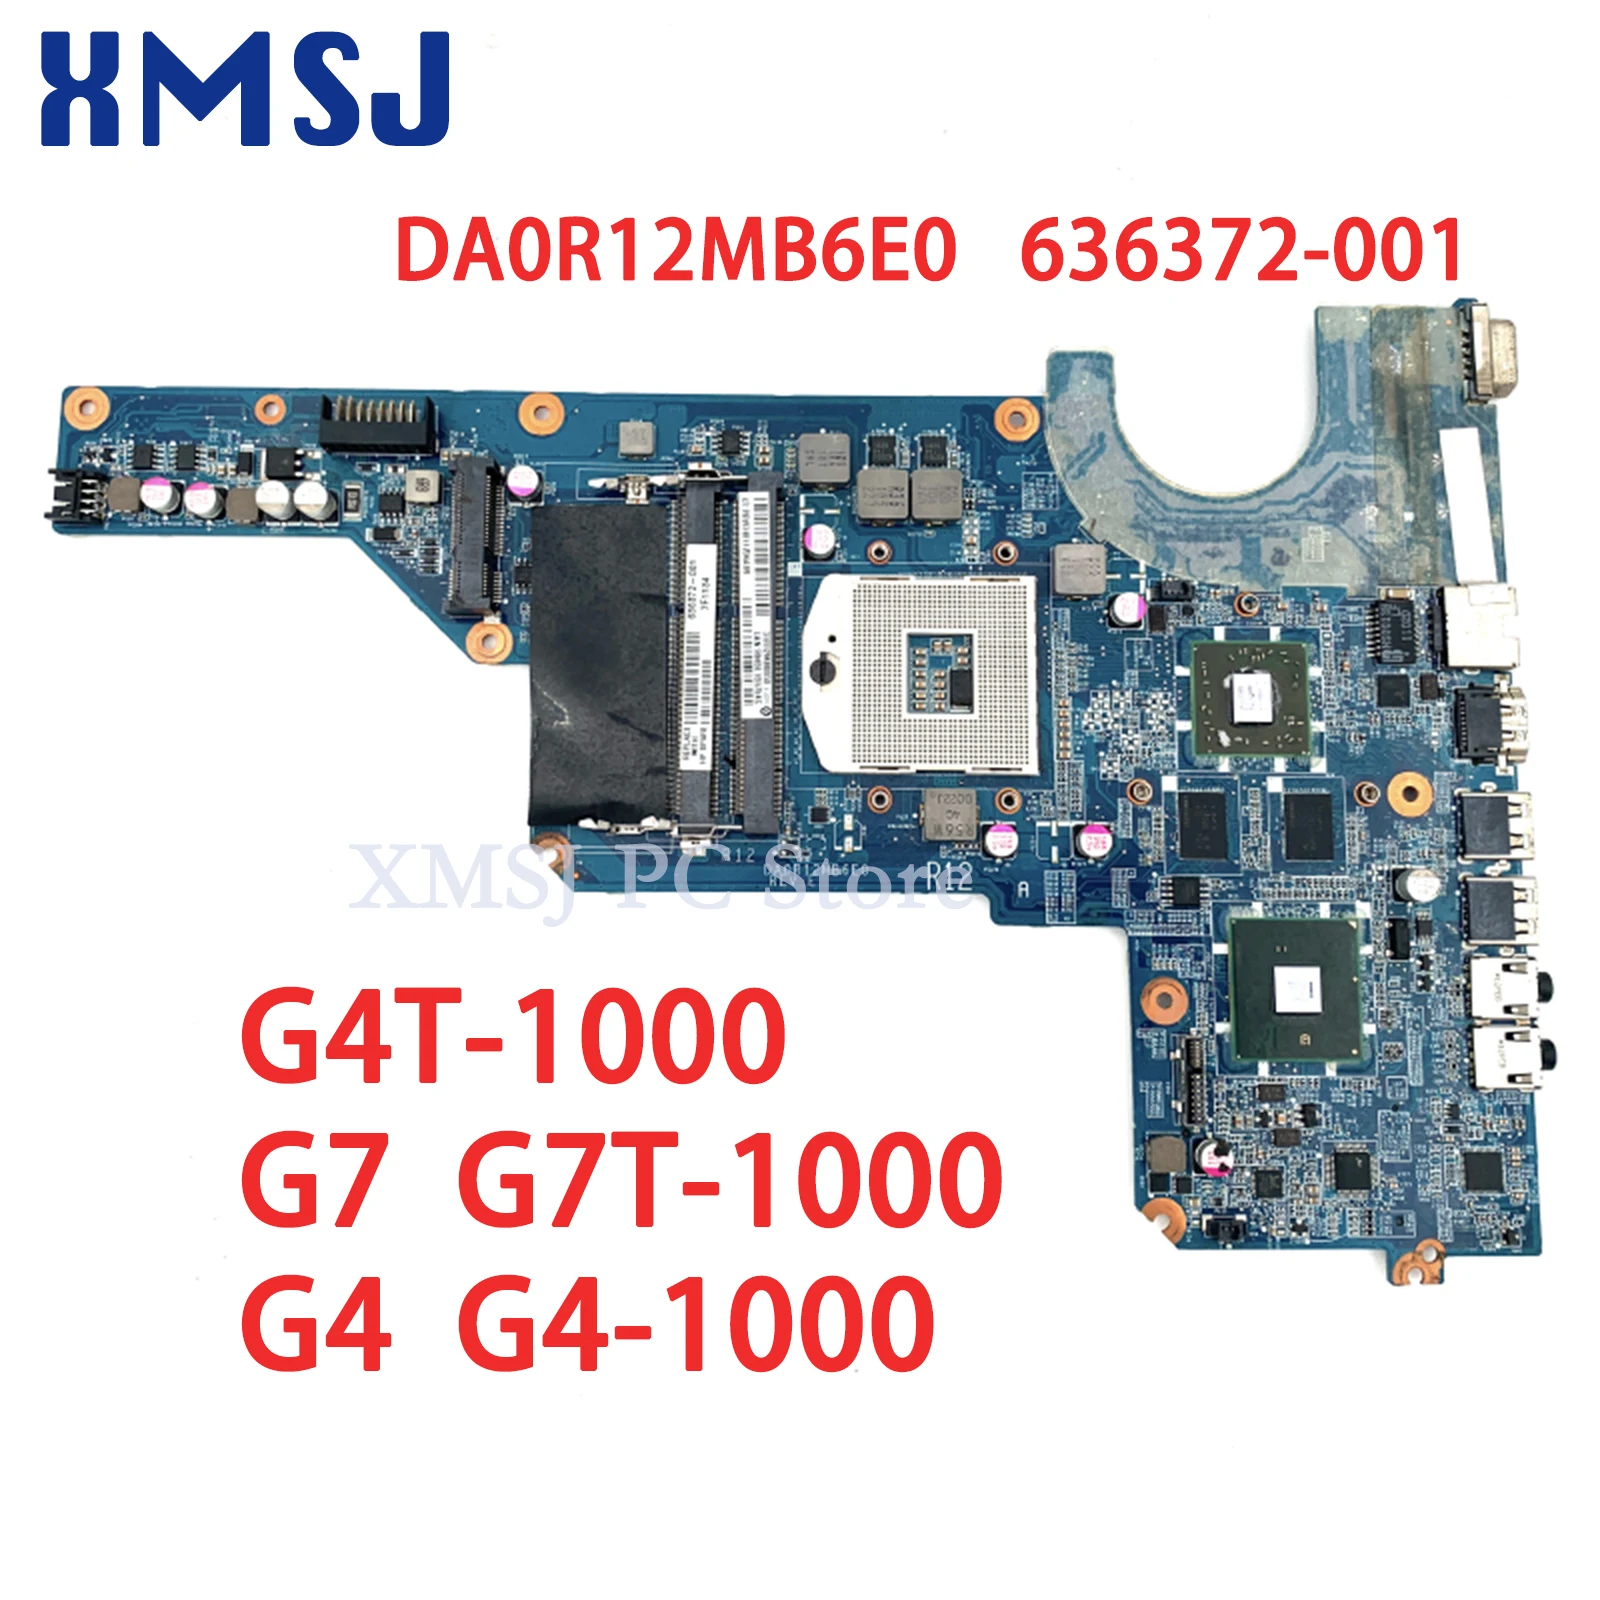 XMSJ1 For HP Pavilion G4T-1000 G7 G7T-1000 G4 G4-1000 Laptop Motherboard HM55 HD6470M 1GB Free CPU